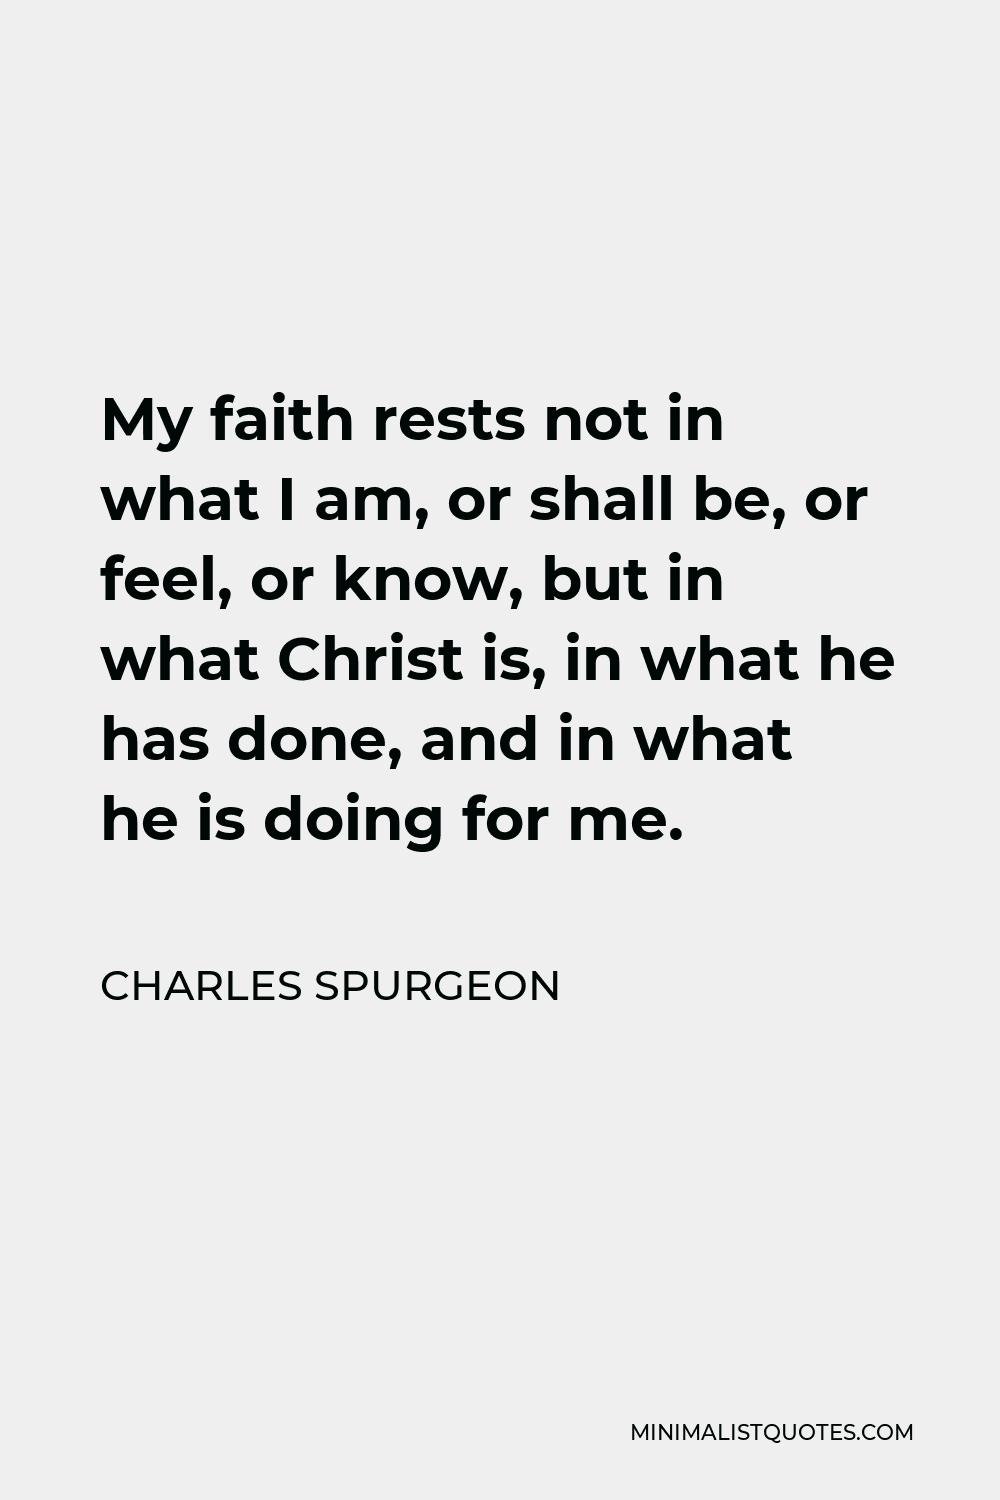 Charles Spurgeon Quote - My faith rests not in what I am, or shall be, or feel, or know, but in what Christ is, in what he has done, and in what he is doing for me.